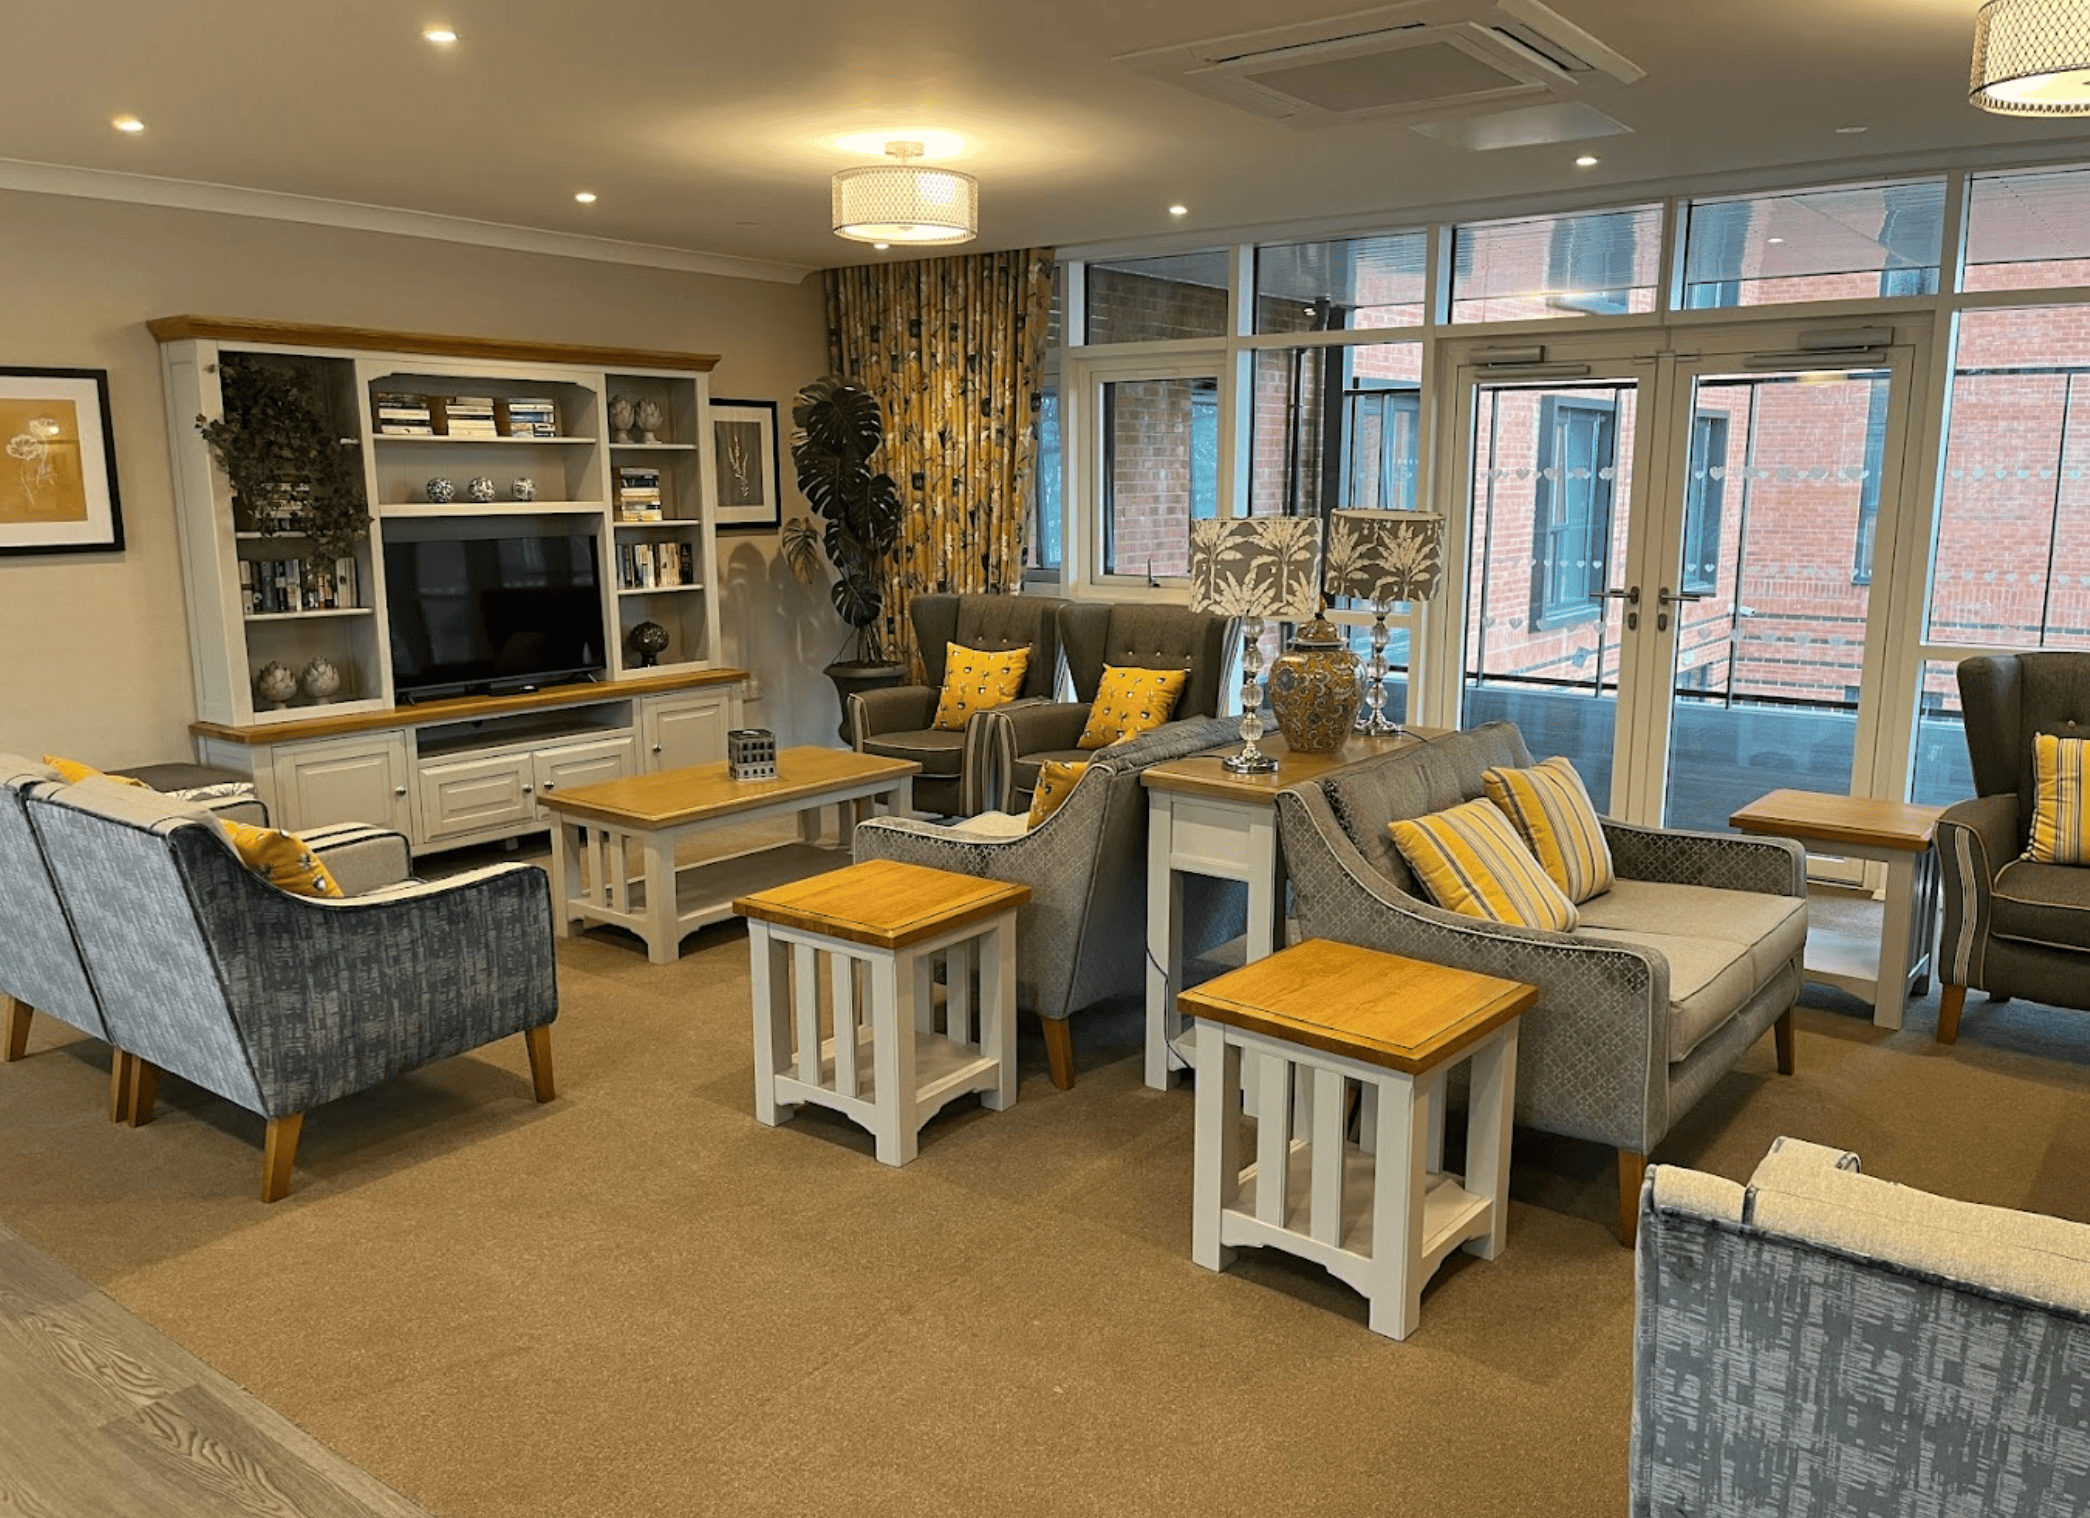 Lounge of Beeston Rise care home in Beeston, Nottinghamshire